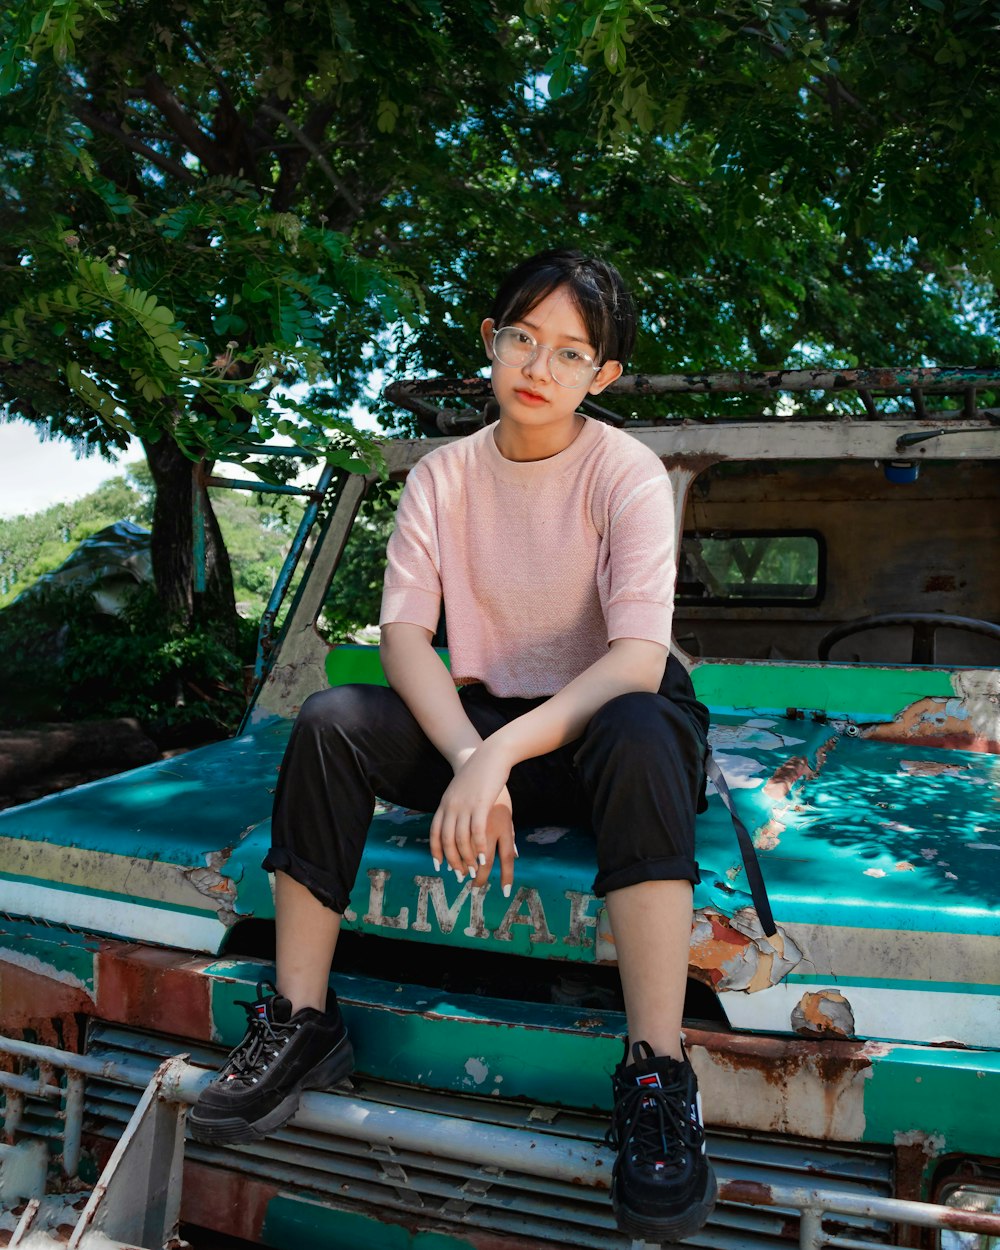 woman in pink crew neck shirt and black pants sitting on brown wooden bench